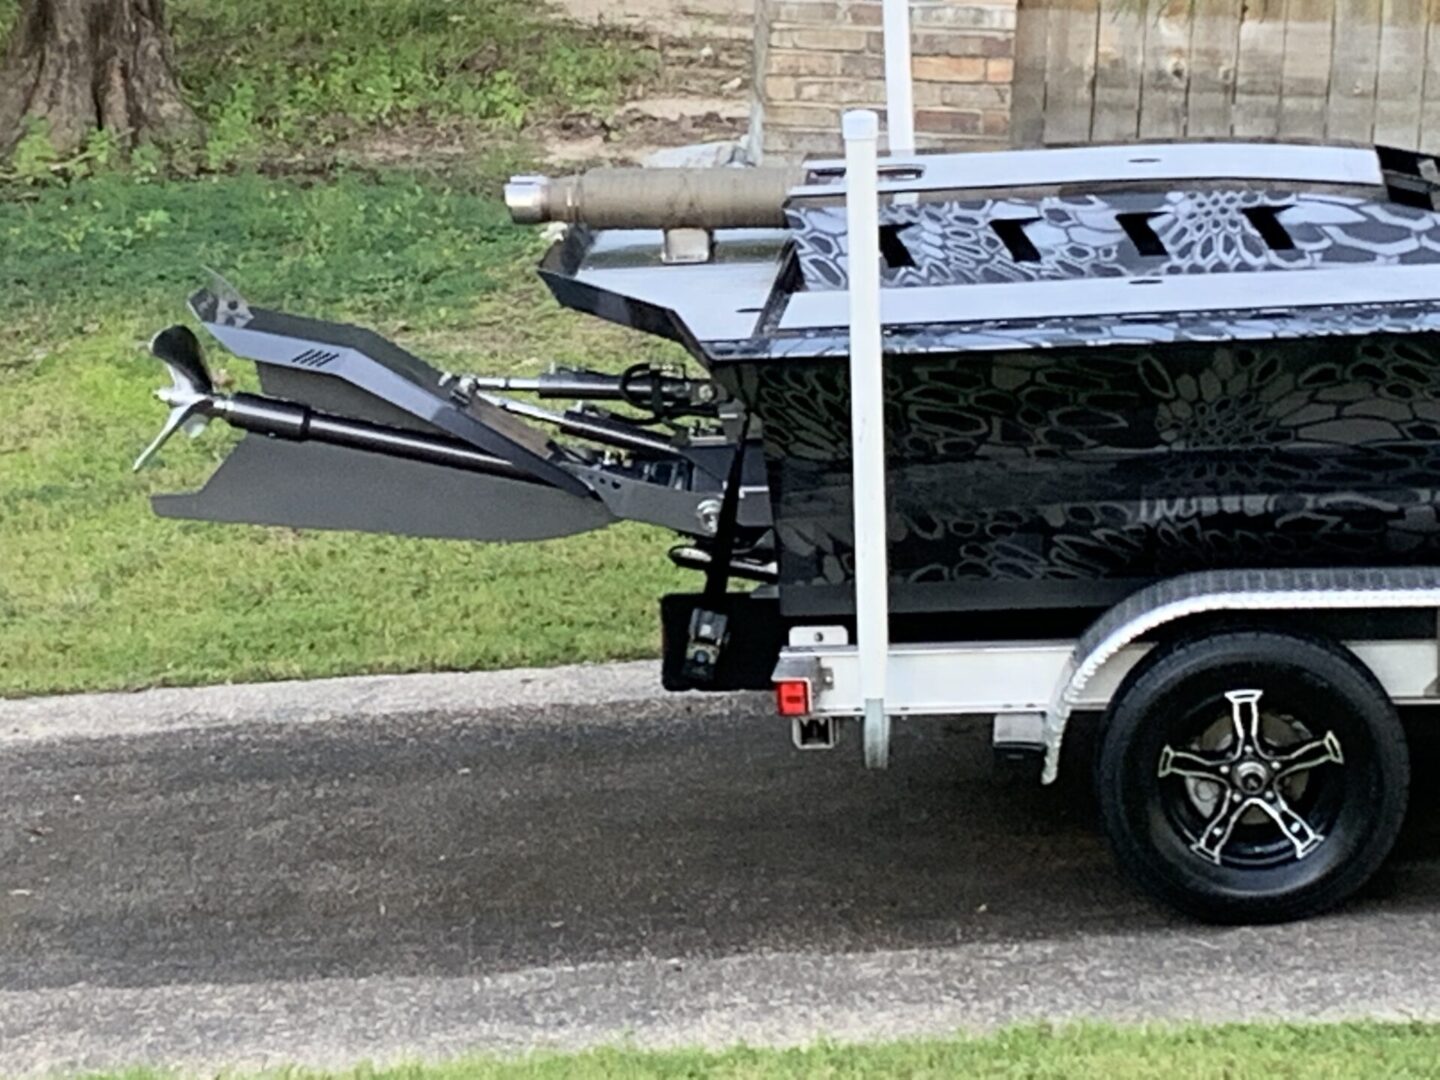 The back of a black boat loaded on a trailer.